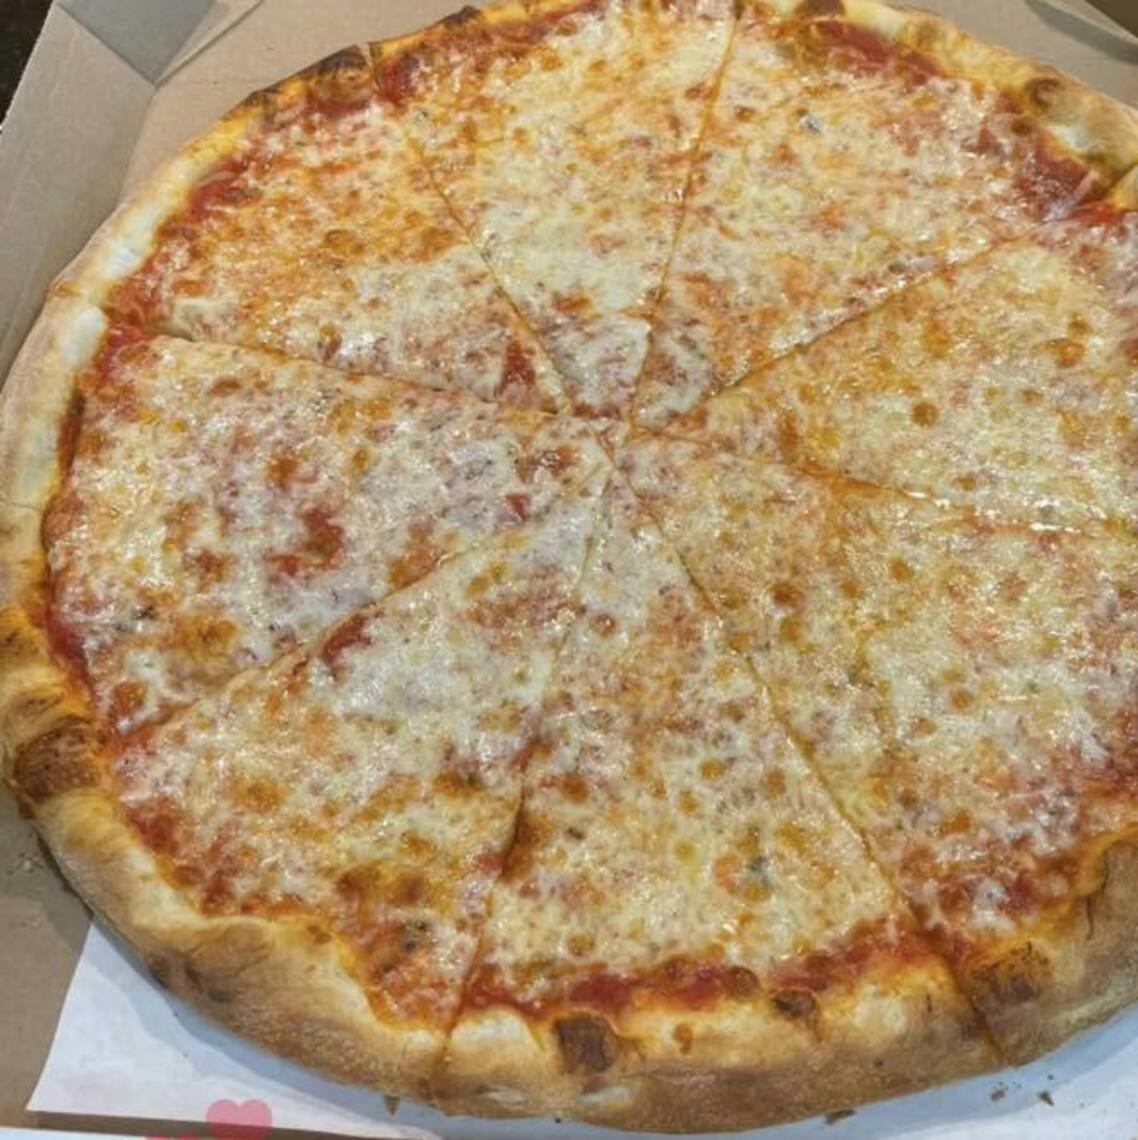 16" X Large from Jo Jo's New York Style Pizza in Hollywood, FL